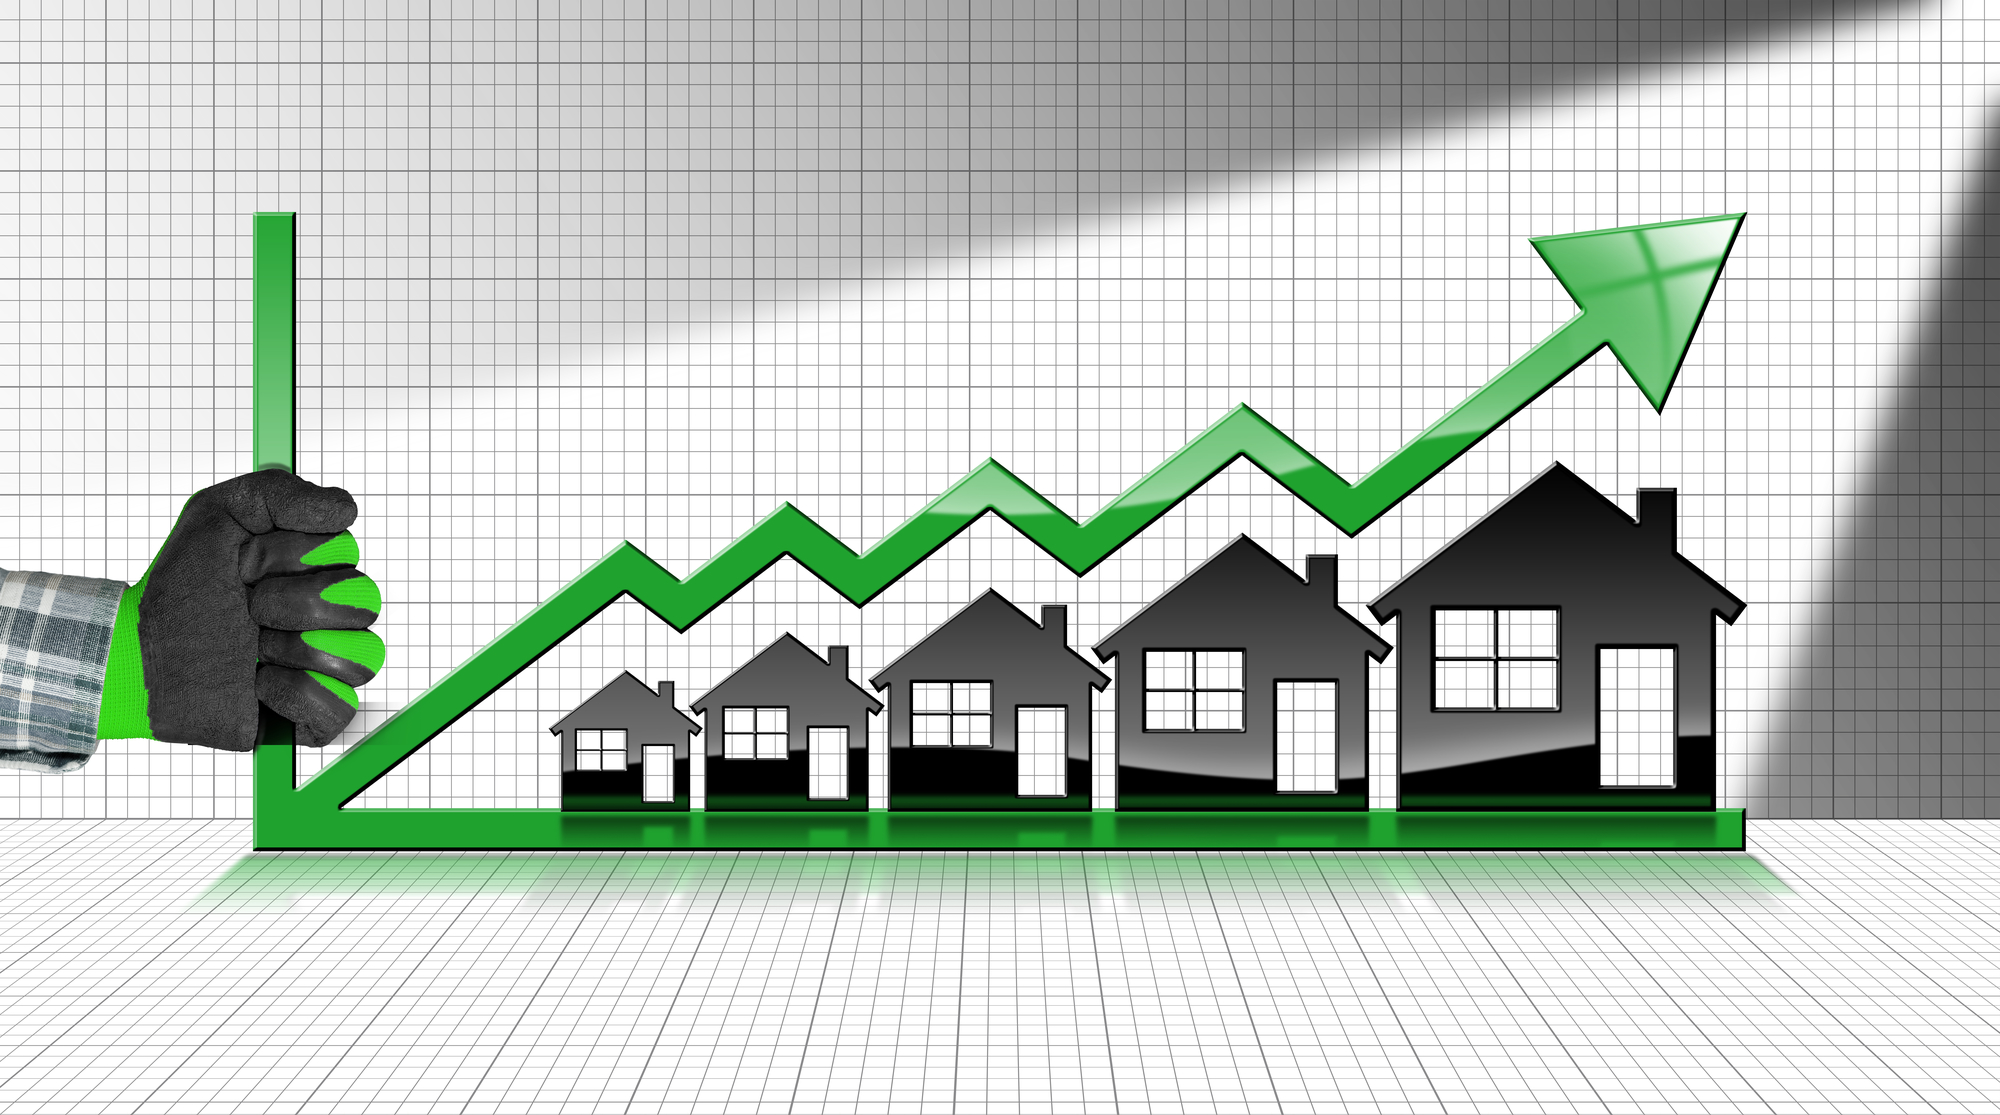 Growing real estate home appraisal - 3D illustration of five house-shaped symbols, a hand with work glove and a graph of growth with a green arrow